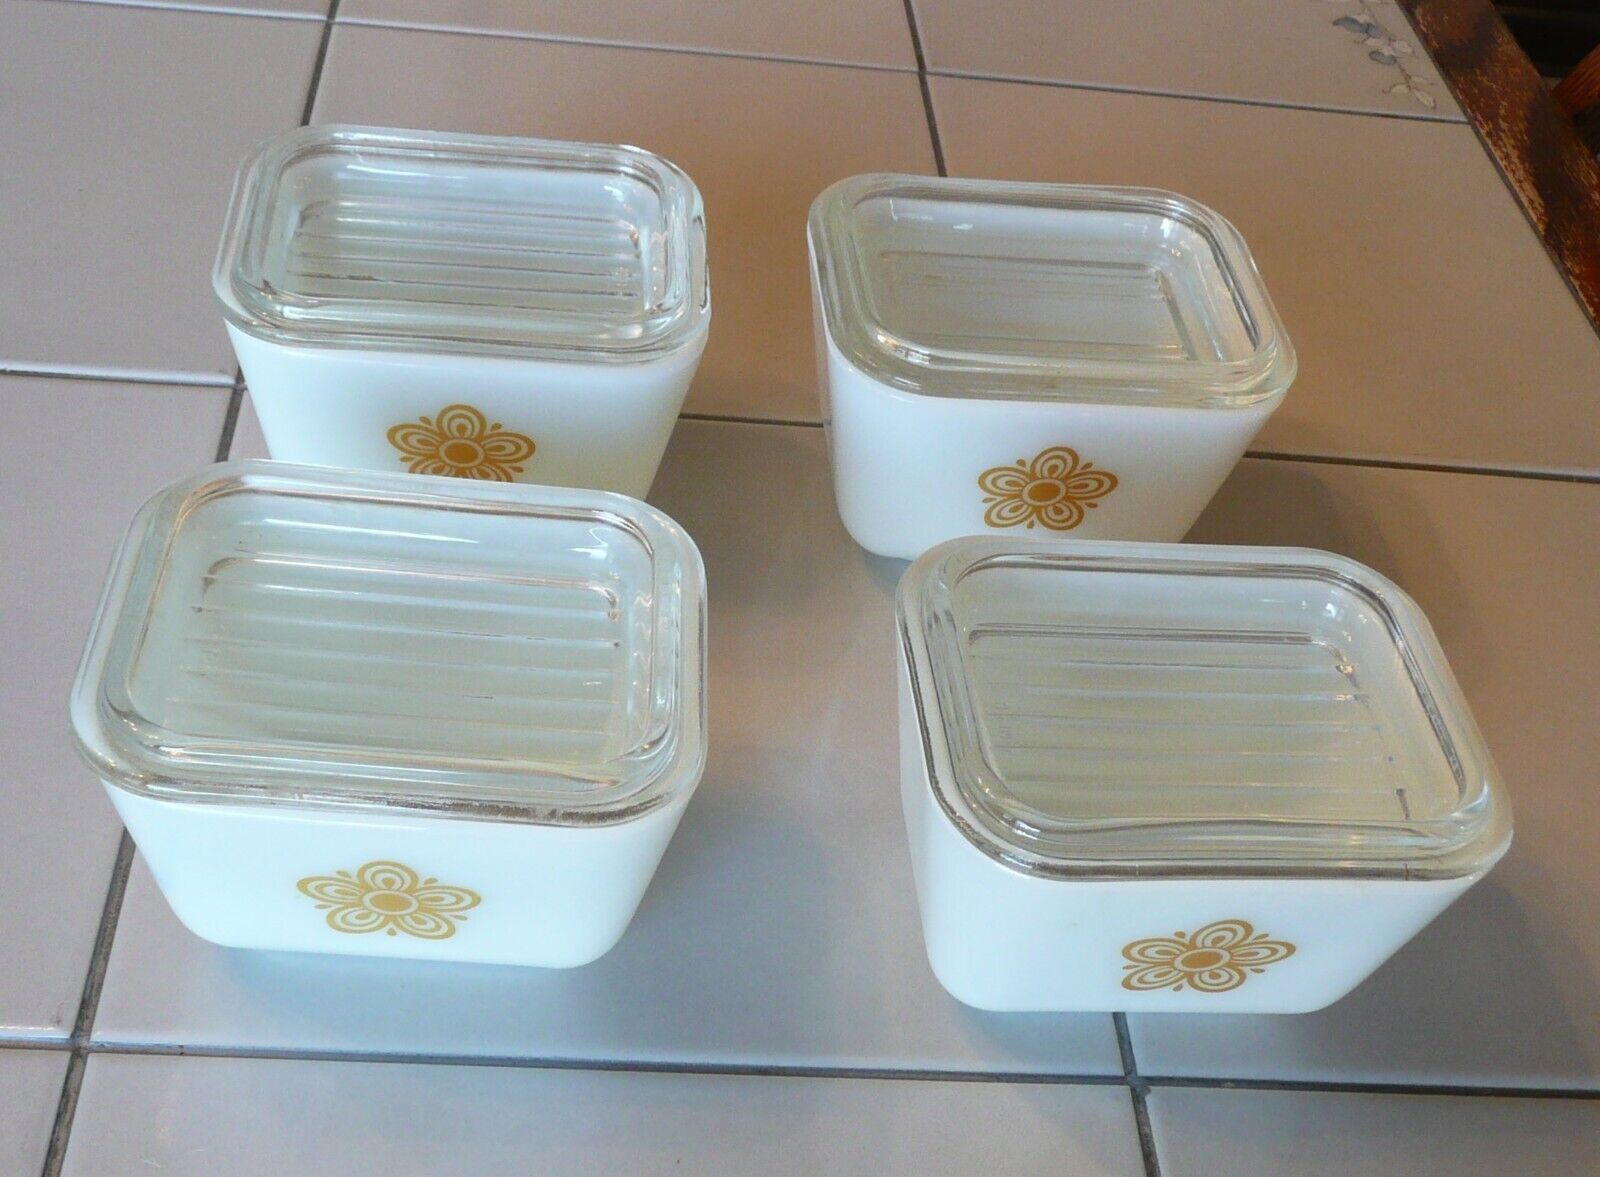 4 Pyrex Butterfly Gold 501-B 1.5 Cup Refrigerator Dishes with 501-C glass lids